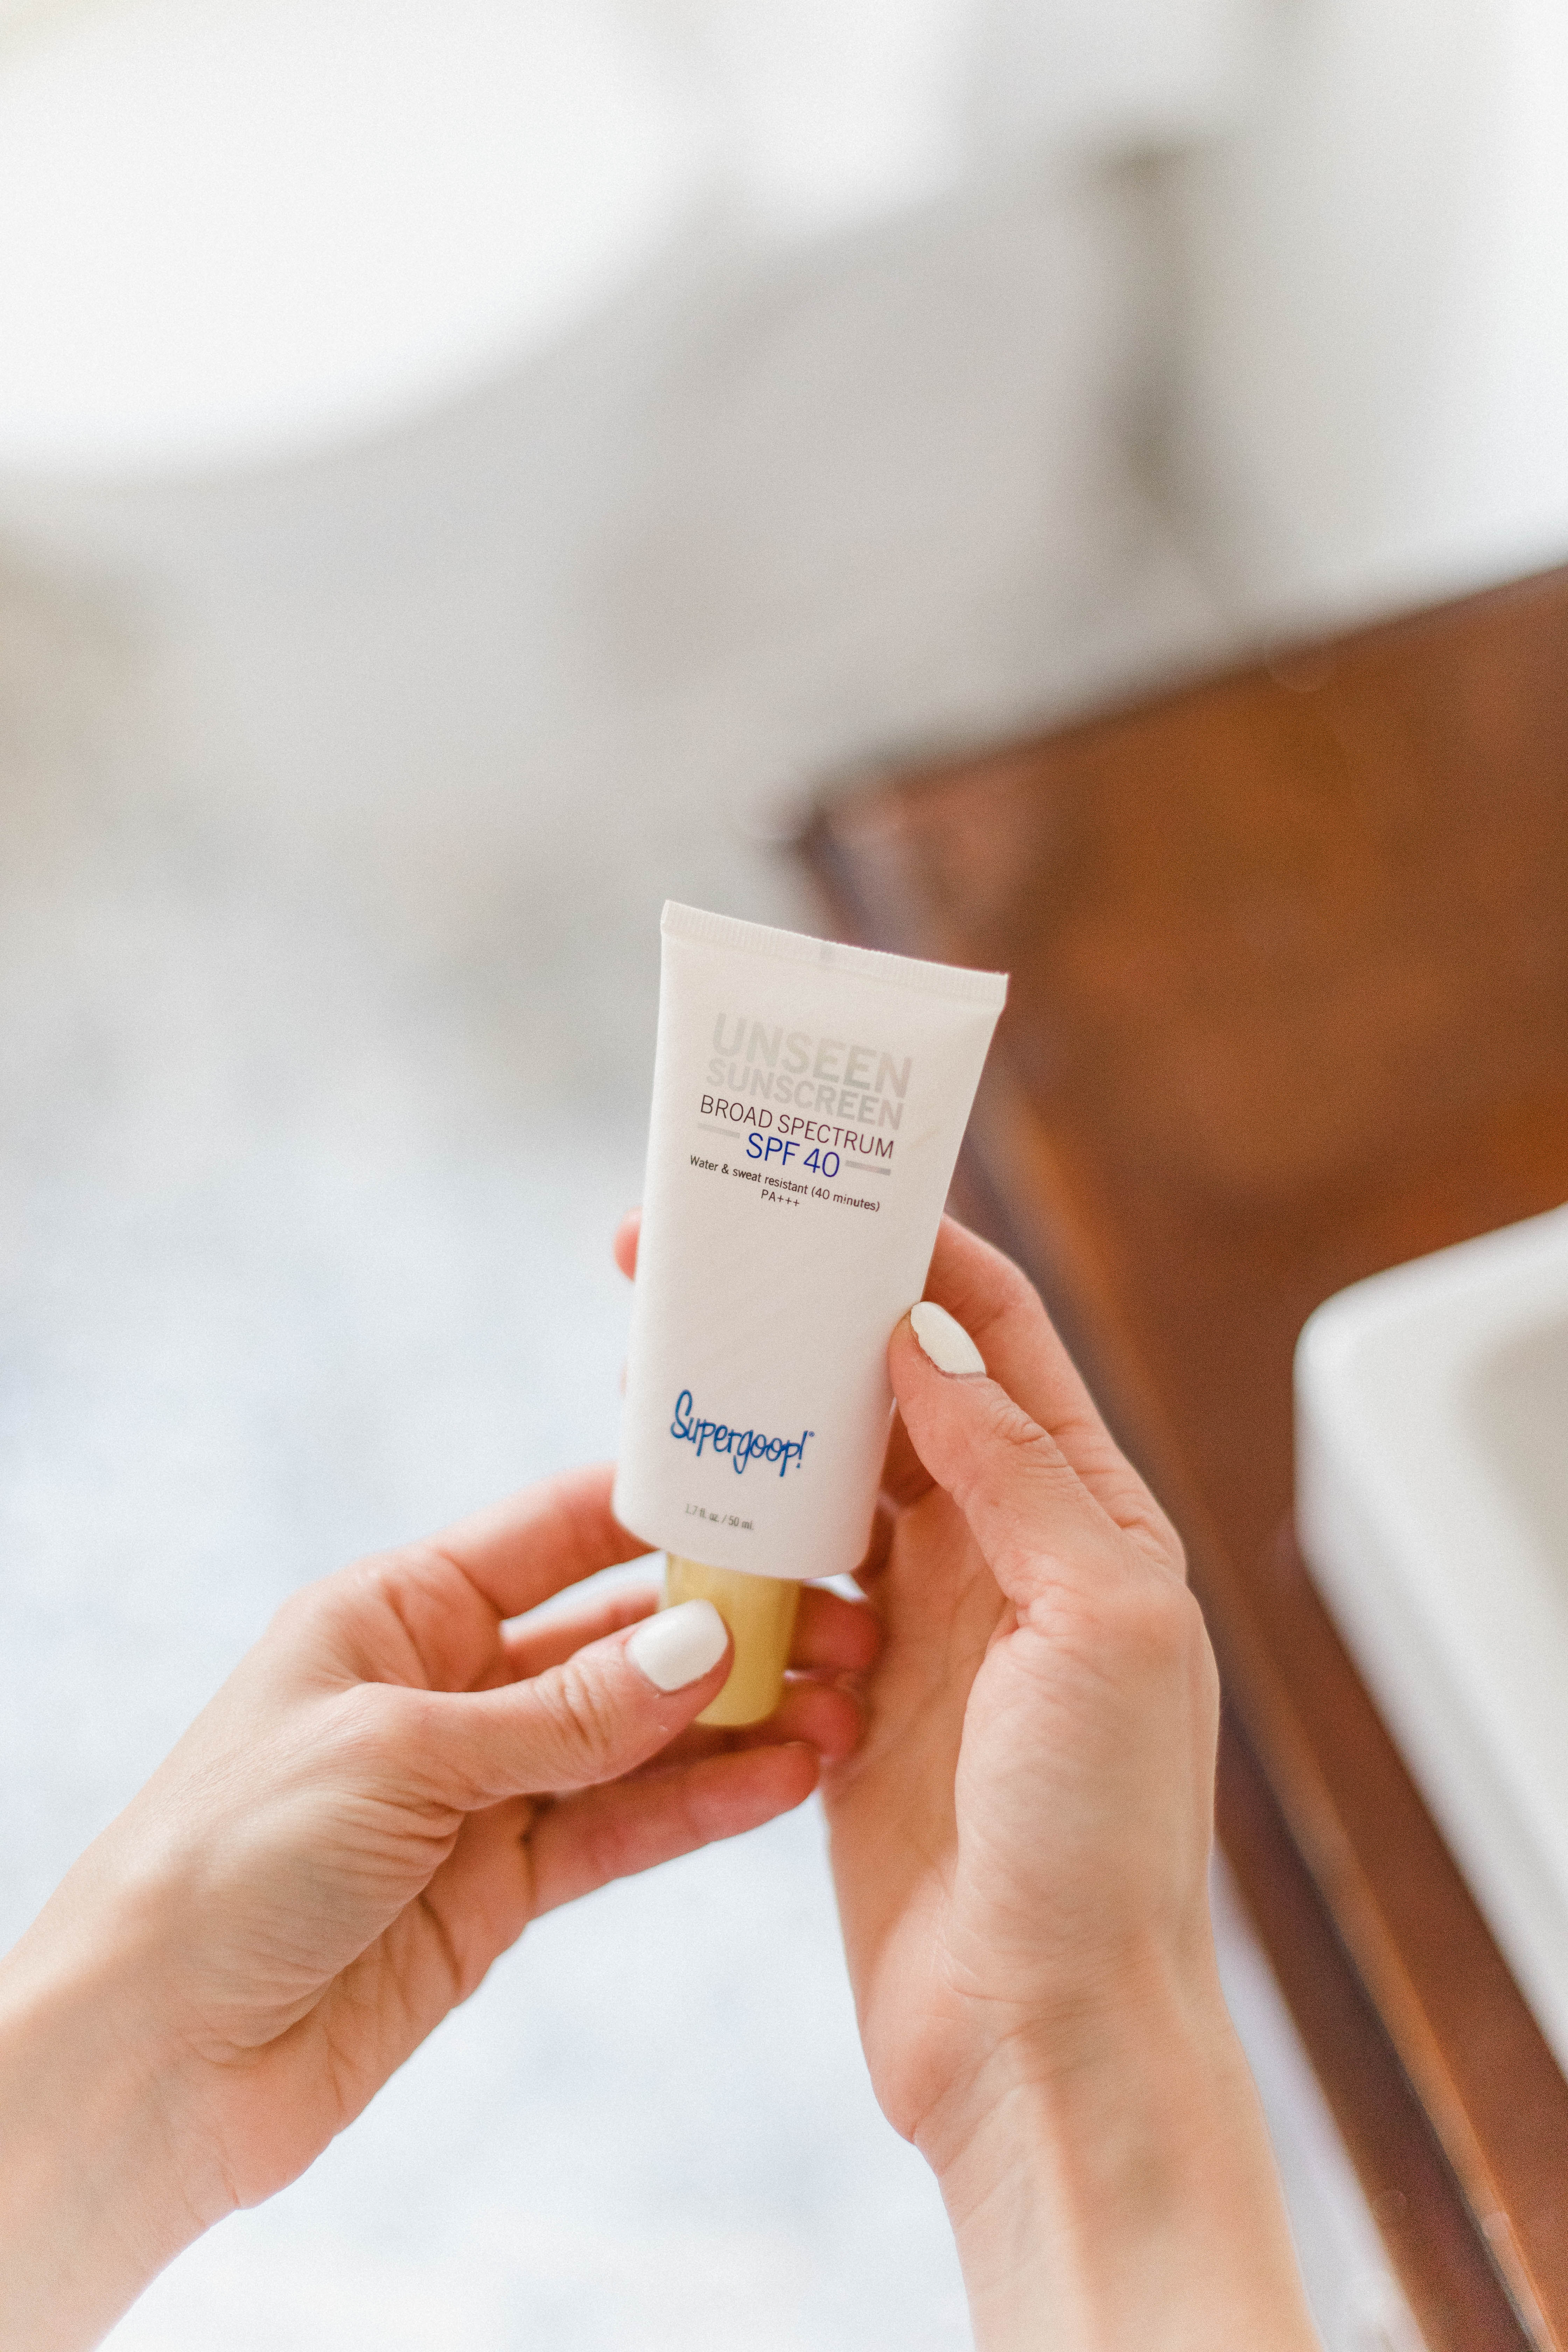 Connecticut life and style blogger Lauren McBride shares Sun Protection Tips for Your Face, including Supergoop! Unseen Sunscreen.